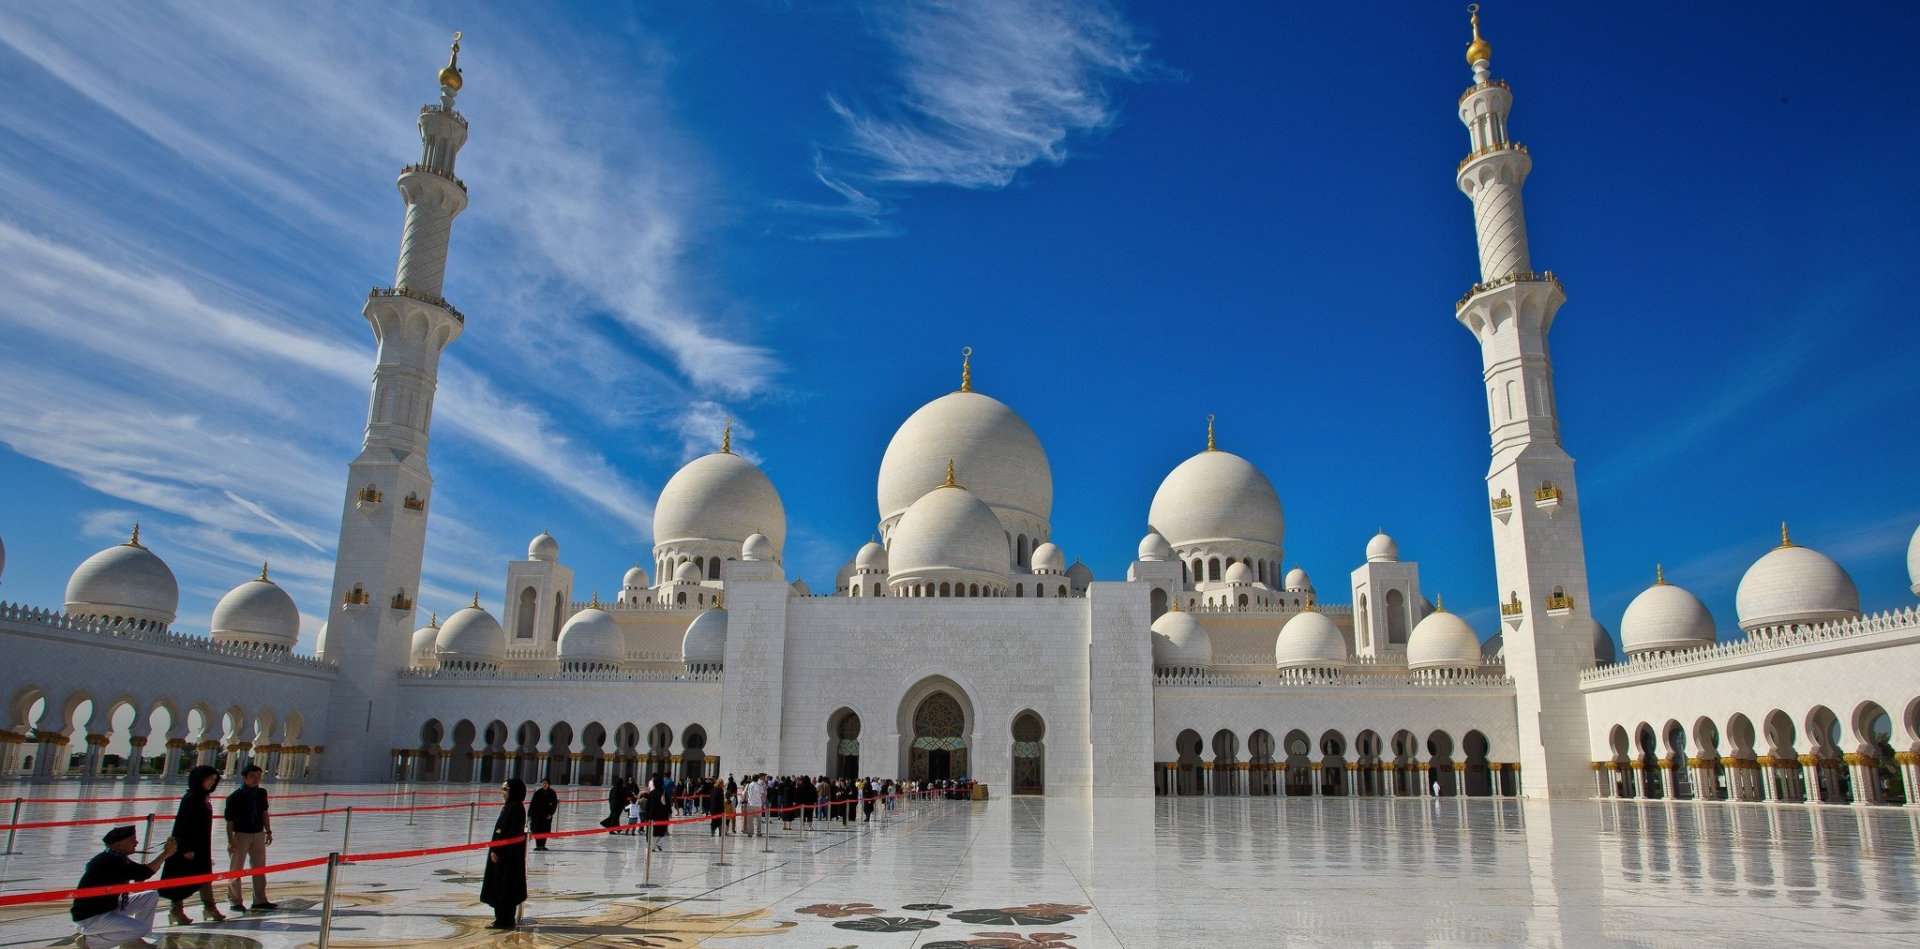 Full Day Abu Dhabi Sightseeing Tours - Private Tour